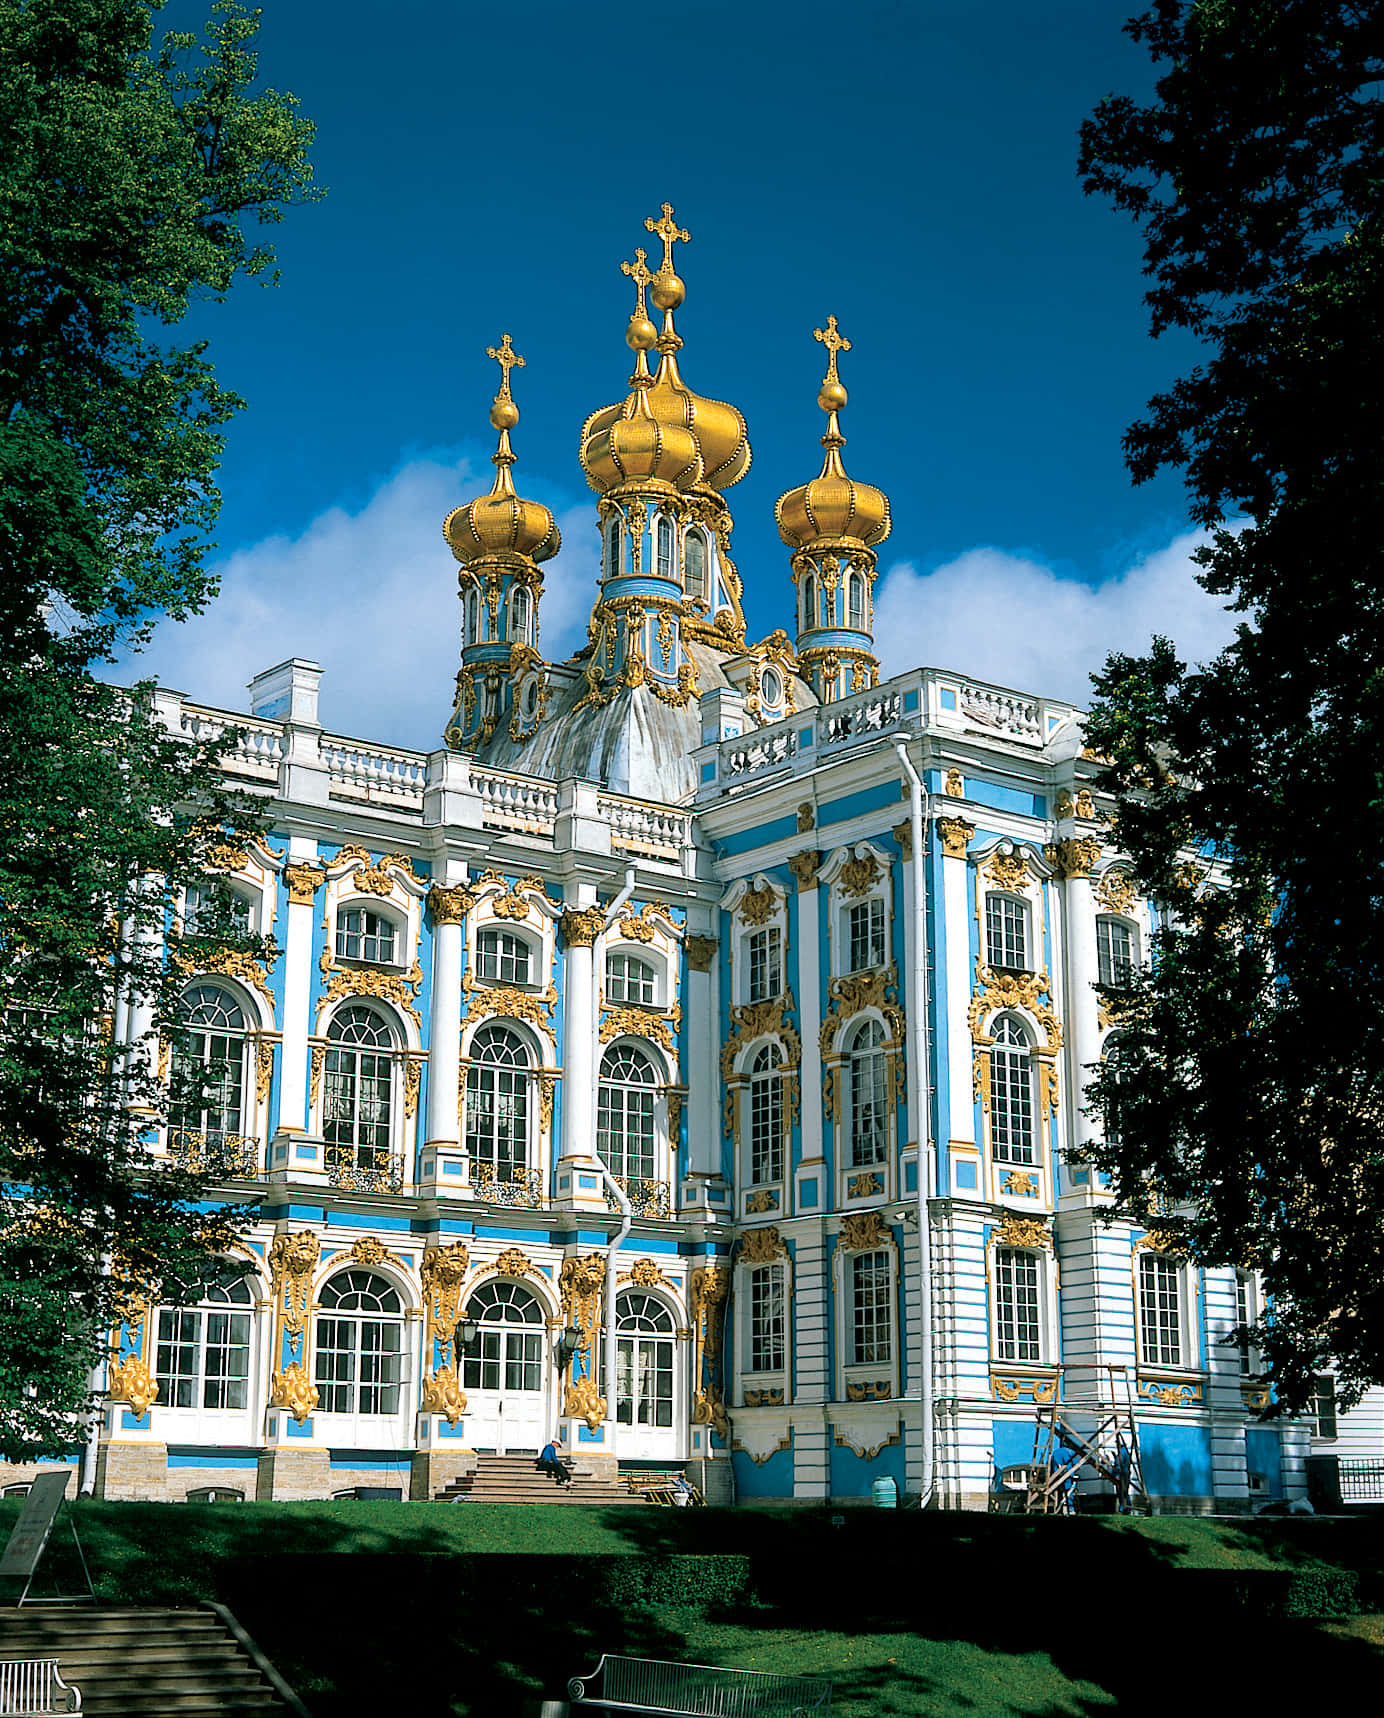 Catherine Palace Framed By Nature Wallpaper